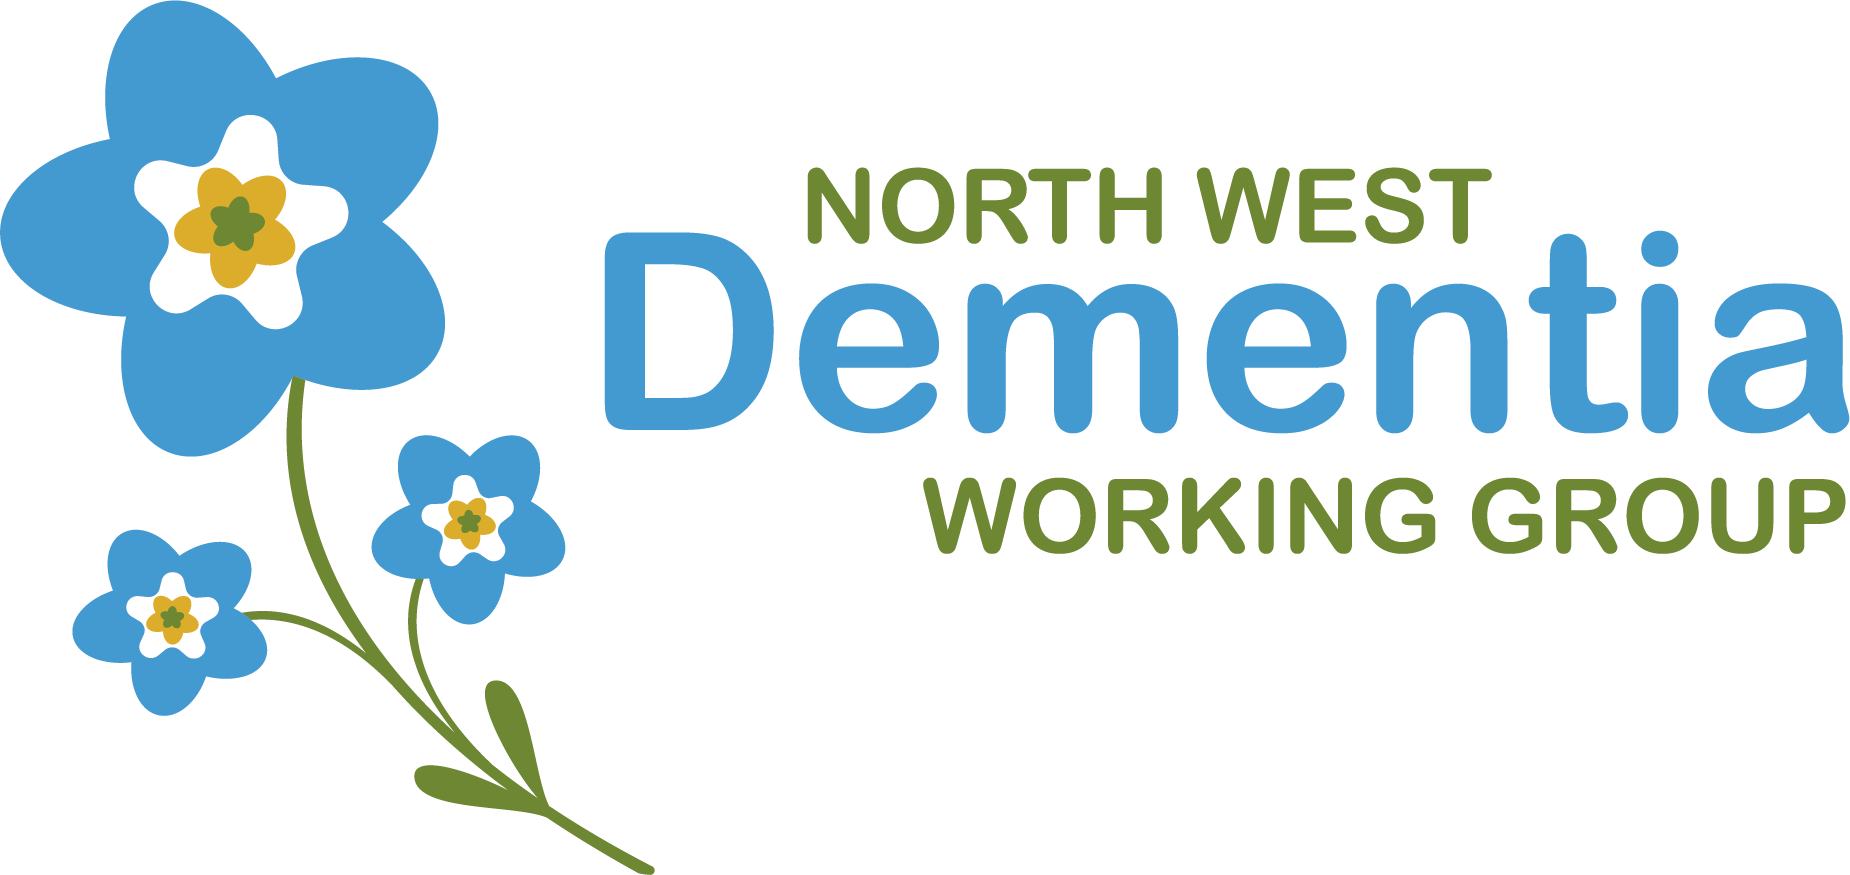 North West Dementia Working Group